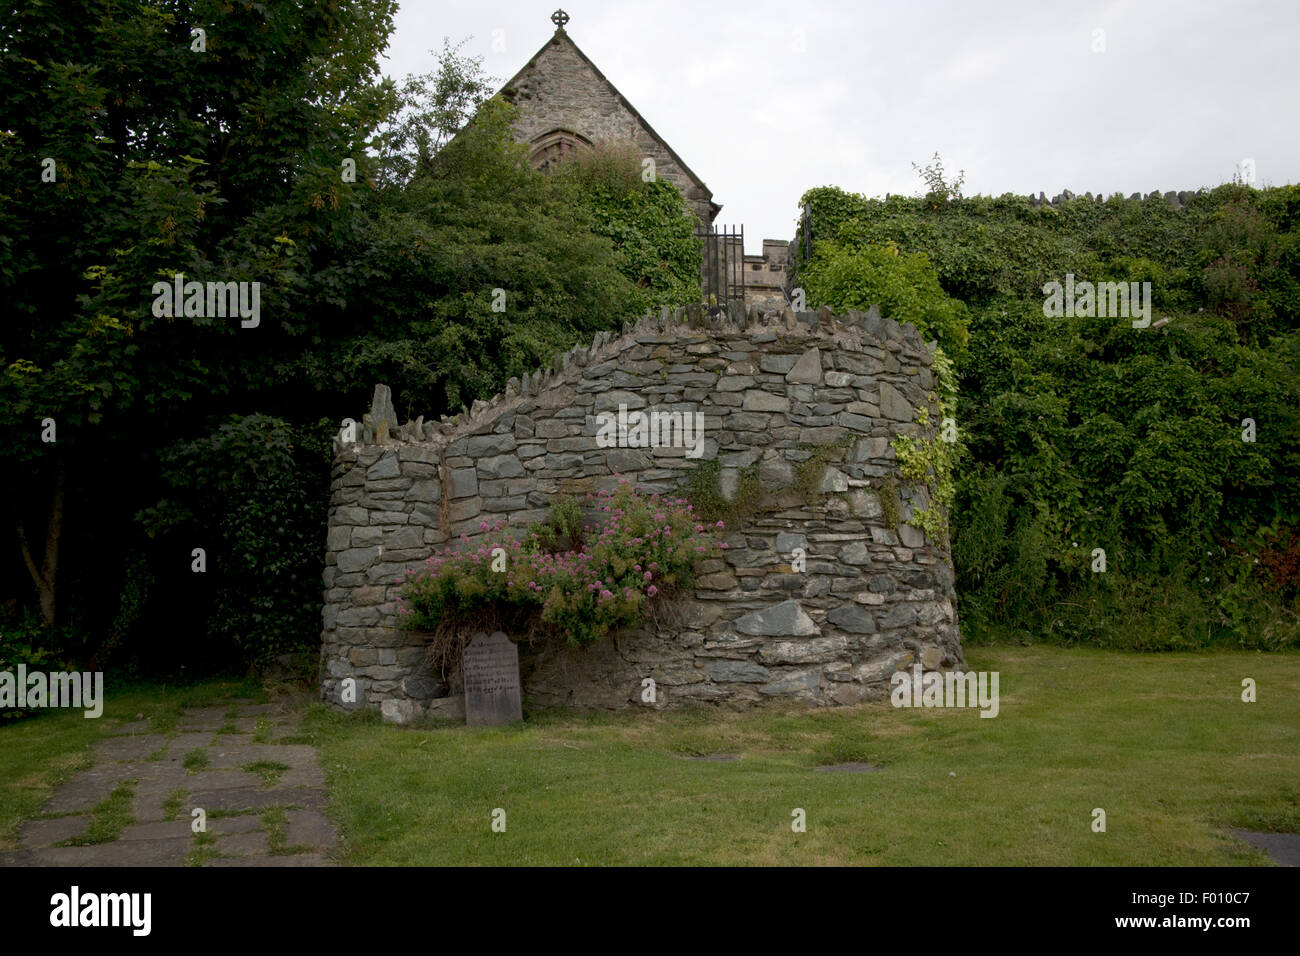 walls of the old roman fort caer gybi Holyhead Anglesey Wales UK Stock Photo